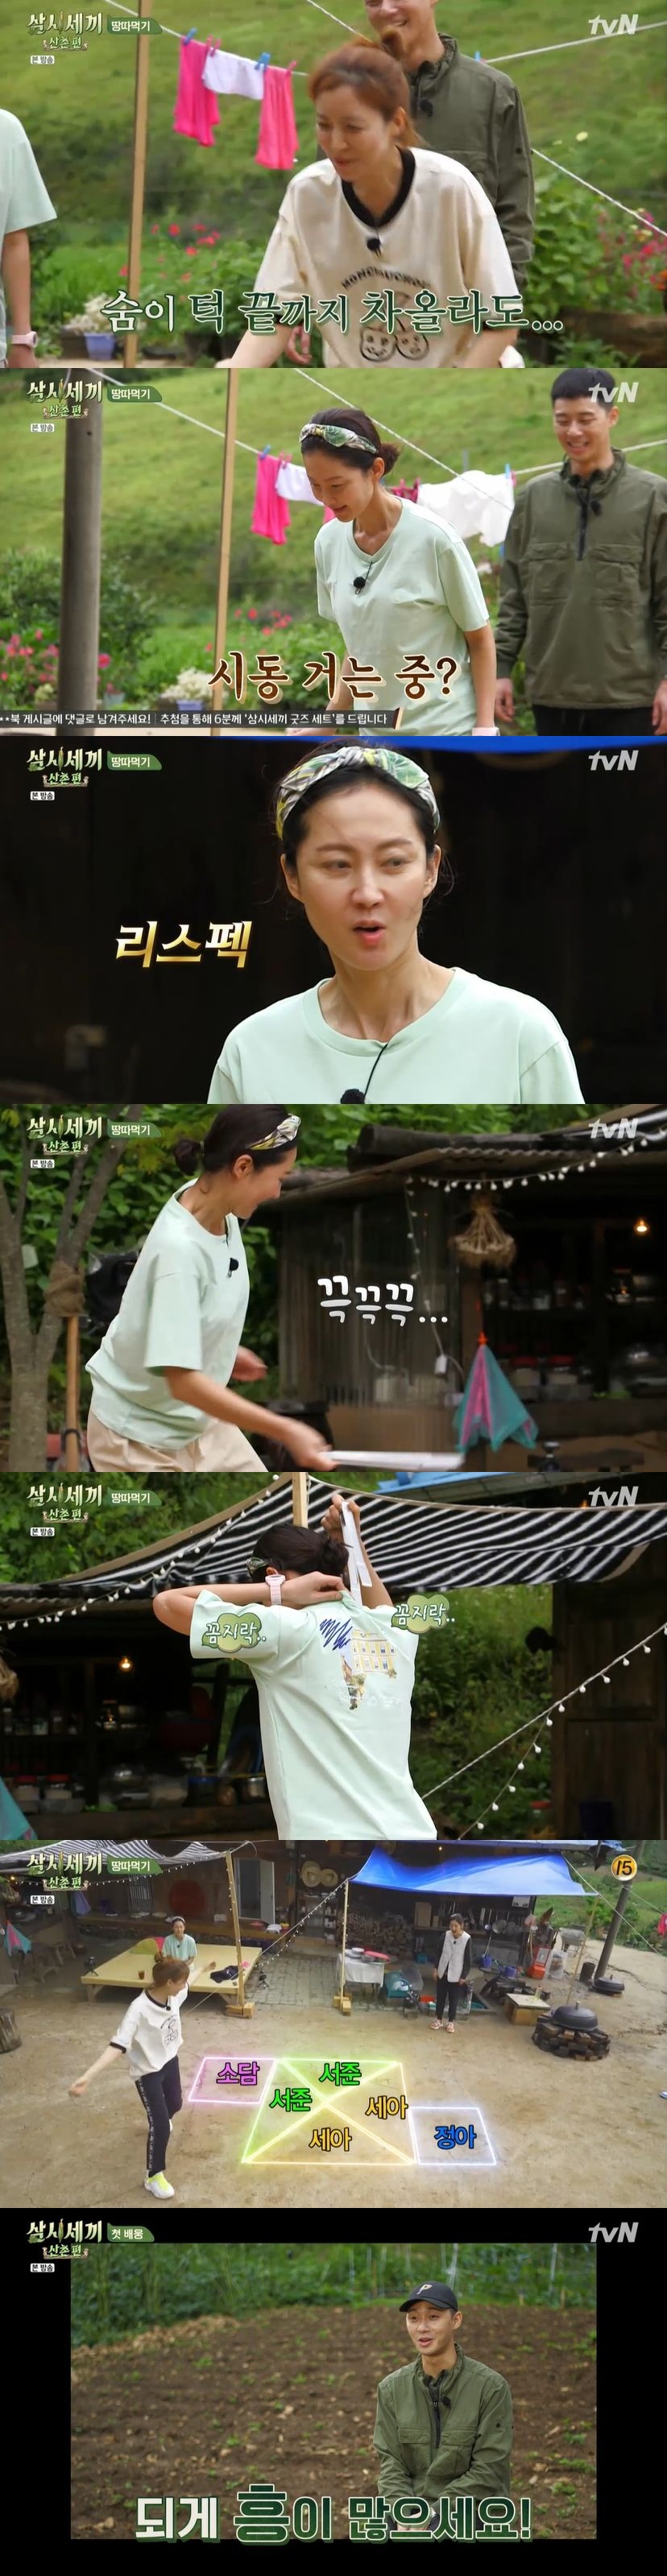 Three Meals a Day Mountain Village tinged the home room with healing until the last episode on Friday evening.On the afternoon of the 18th, TVN entertainment program Three Meals a Day Mountain Village featured the members who came to the end.On this day, the members carried out the dishes and the memories of eating the land before preparing for lunch. The eating of the land was conducted as a solo exhibition, not a team exhibition, and Yoon Se-ah was the first.Yoon Se-ah showed off his outstanding skills and went on without a blockage. Yum Jung-ah envied that we are liberating from the dishes today.When Yum Jung-ah brought this up, Yoon Se-ah stumbled over the line, and Yum Jung-ah nodded, saying, Yes, I did too much.Yum Jung-ah then challenged to land-eating; Yum Jung-ah did his best to land-eating, as he did in rope-skipping.This passion of Yum Jung-ah made the viewers laugh and cheer.Park Seo-joon, Park So-dam, all round and the turn of the Yoon Se-ah came back.Yoon Se-ah won the ground three times and almost fell in the center of the game while he was continuing the game, but he managed to balance.Park Seo-joon, who saw this, laughed, saying, You show me B-boy.Yum Jung-ah asked if it was hard to pick up a stone thrown on the ground and asked, Can I use some tong chances?Members were readily allowed, and Yum Jung-ah came to Game with a tong stuck behind his back, Yum Jung-ah saying: This is so hard for you?Park Sang-dam was determined to be the washing dishes after a fierce battle, and Yum Jung-ah was able to escape.After lunch, it was time for Park Seo-joon to leave; Park Seo-joon said, I think I took a drama.Its a diary, he said, stimulating the laughter of people around him. Yum Jung-ah said, I will continue to practice jumping rope.After dinner, the members gathered in the room and talked about Dorando. Yum Jung-ah said, At first, someone cooked, but I became a chef.I think it was a special occasion. I do not fear any dishes. Three Meals a Day Mountain Village was loved by viewers for its role as a healing entertainment that takes charge of Friday night.Especially, Yum Jung-ah, Yoon Se-ah, and Park So-dam, who seem to be somewhere awkward but do well, had the power to cheer.The life of the three mountain villages that can not be seen anymore leaves a deep regret.